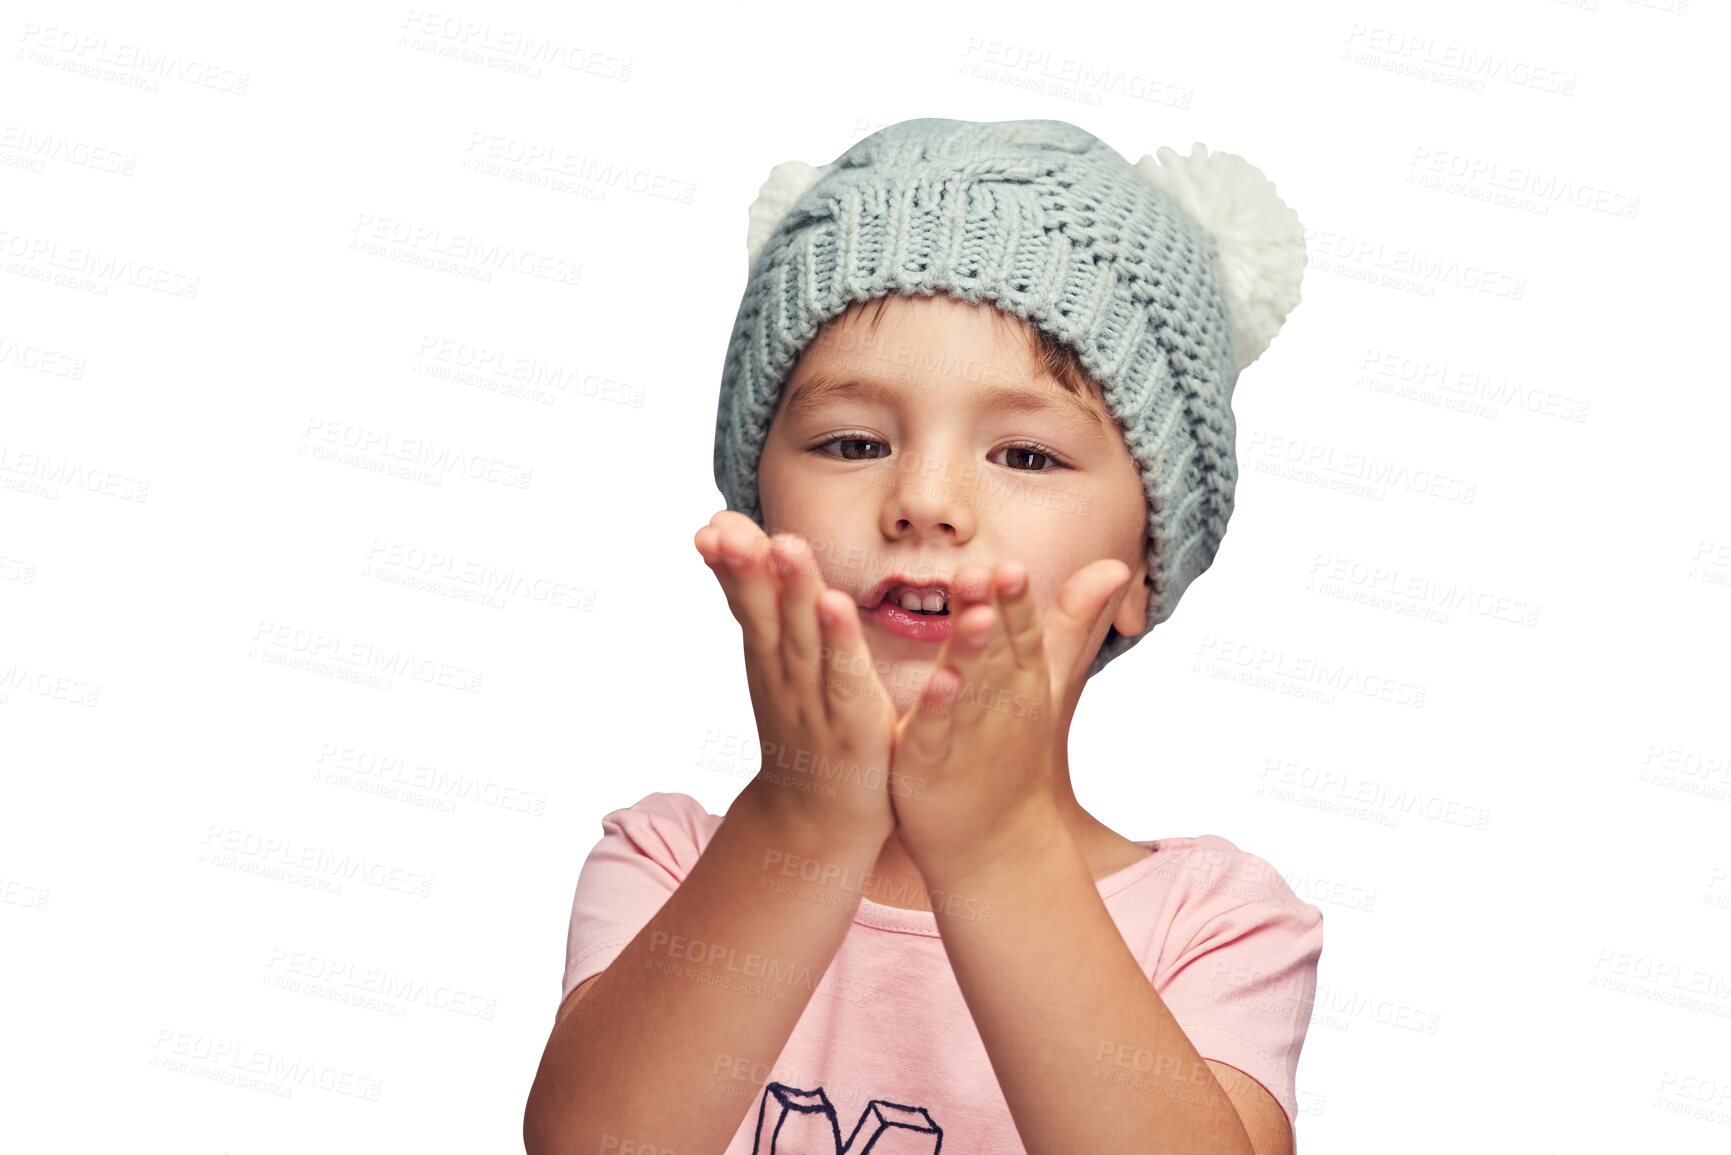 Buy stock photo Blowing, kiss and child with love in portrait and show care in transparent, isolated or png background. Hands, gesture and kid on Valentines day with romance, emoji of kindness and share support